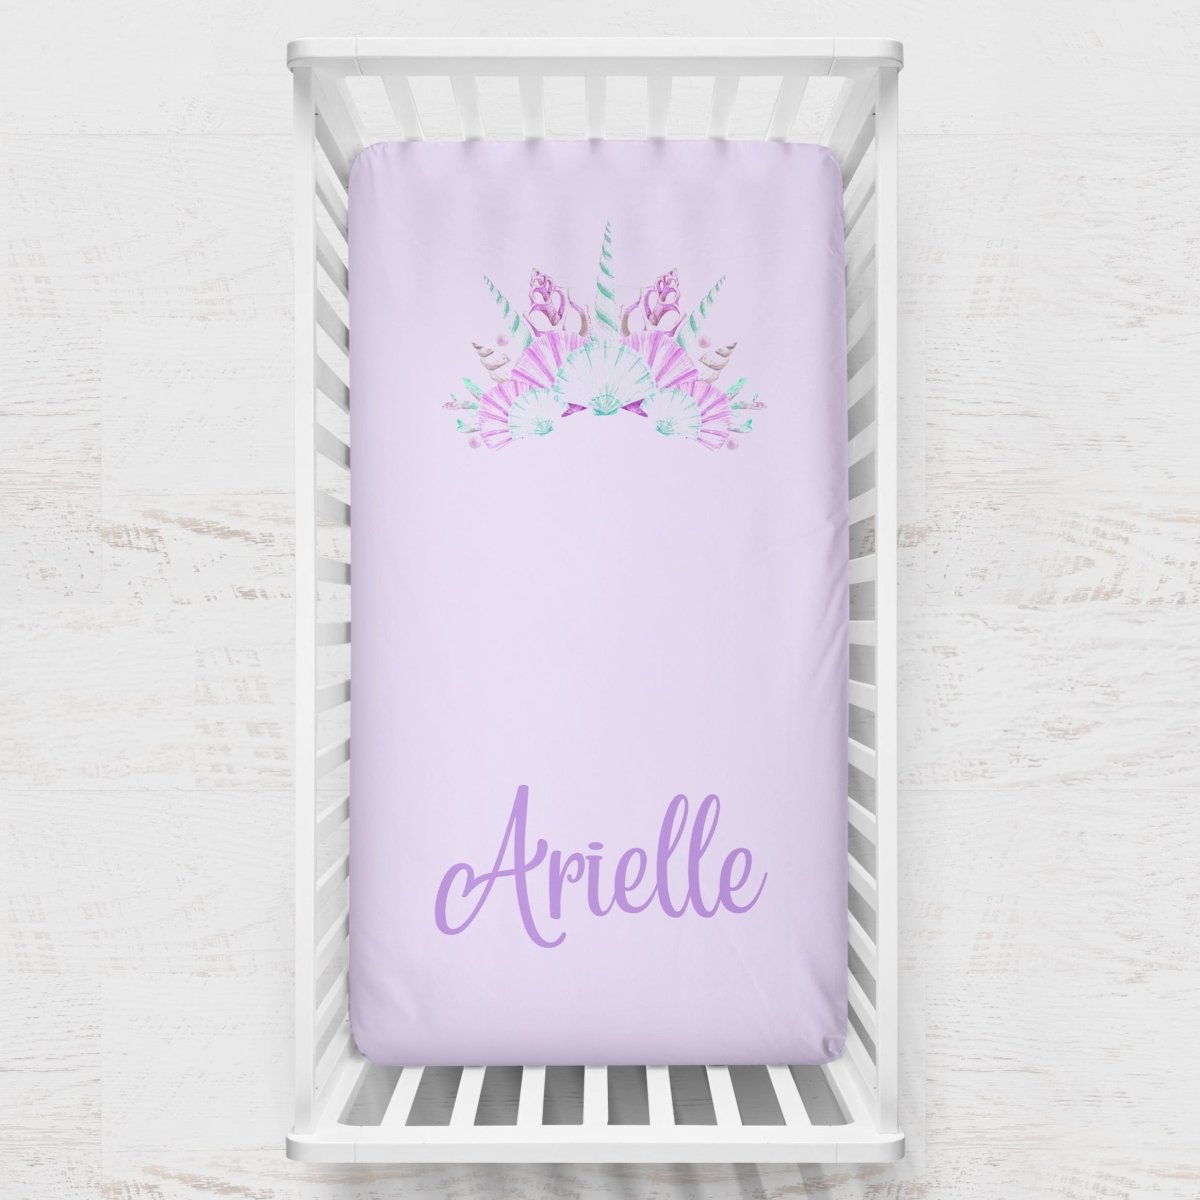 Jewel Mermaids Personalized Crown Crib Sheet - gender_girl, Personalized_Yes, text